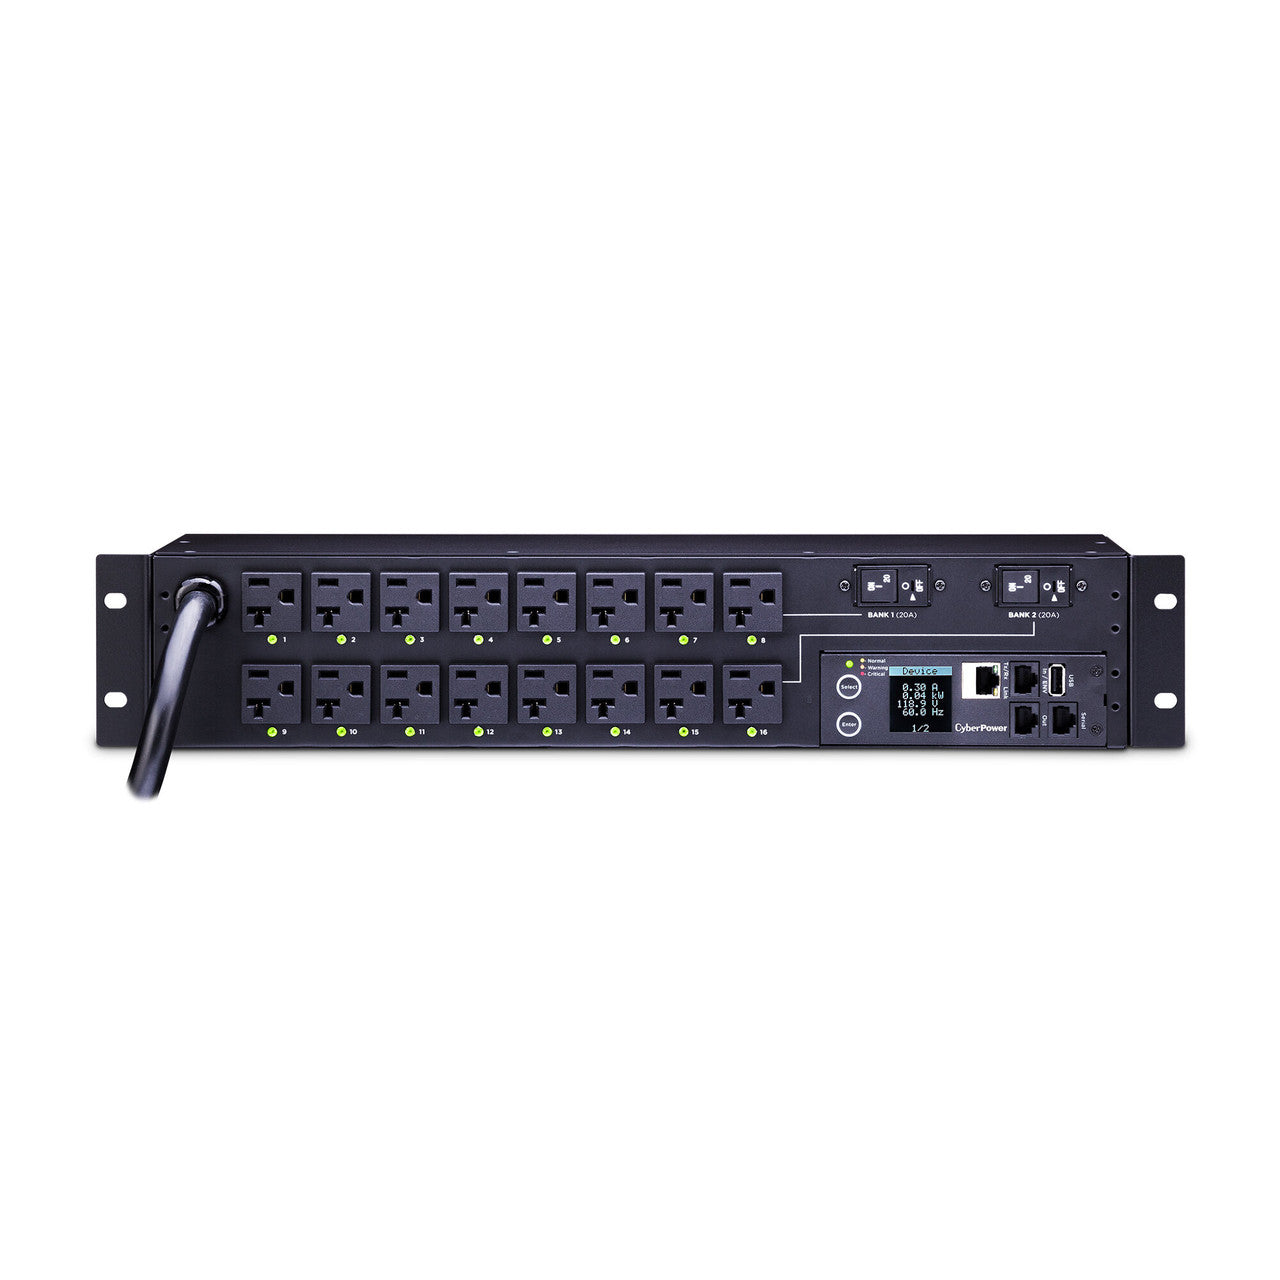 CyberPower PDU81003 SW MBO PDU 30A 120V Metered-by-Outlet Switched PDU 16 NEMA Outlets 12ft cord 3yr Warranty